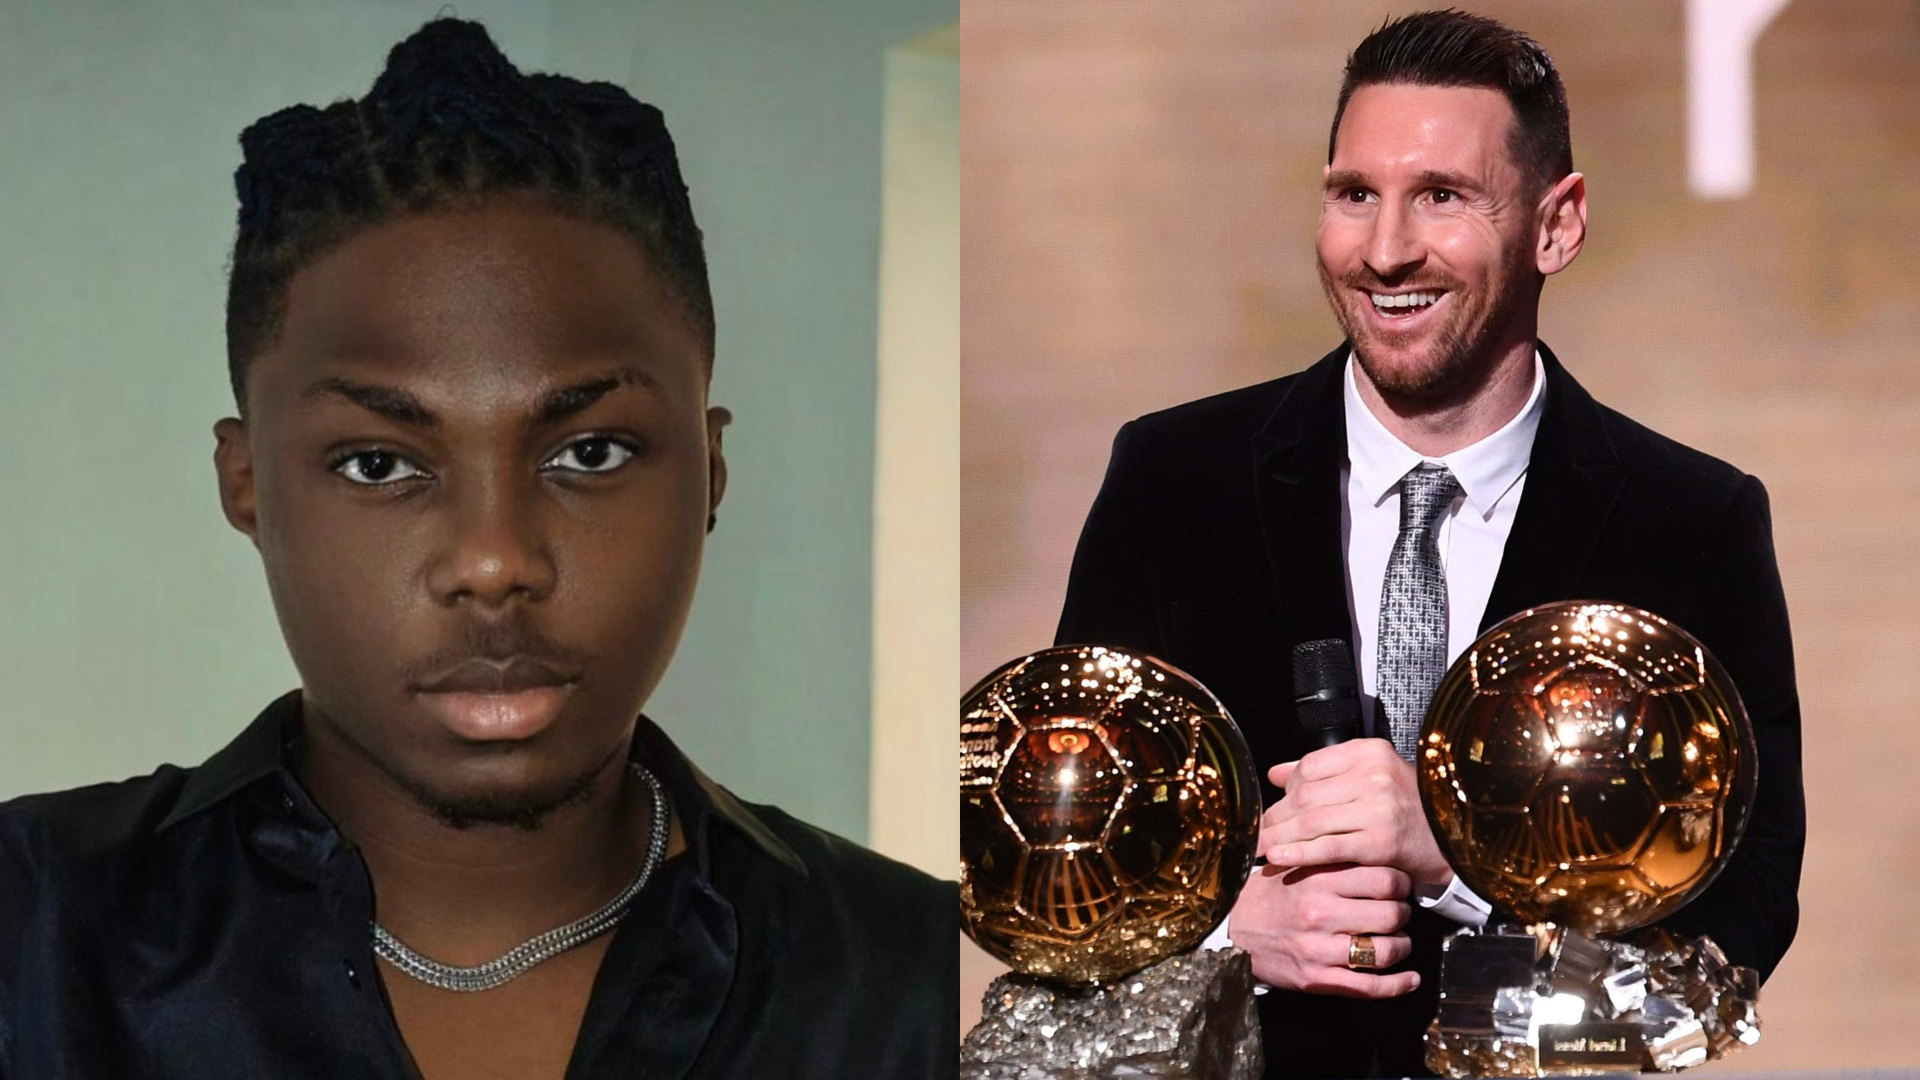 "Messi Didn’t Deserve To Win Ballon d’Or Over Haaland" – Singer Bayanni Spills